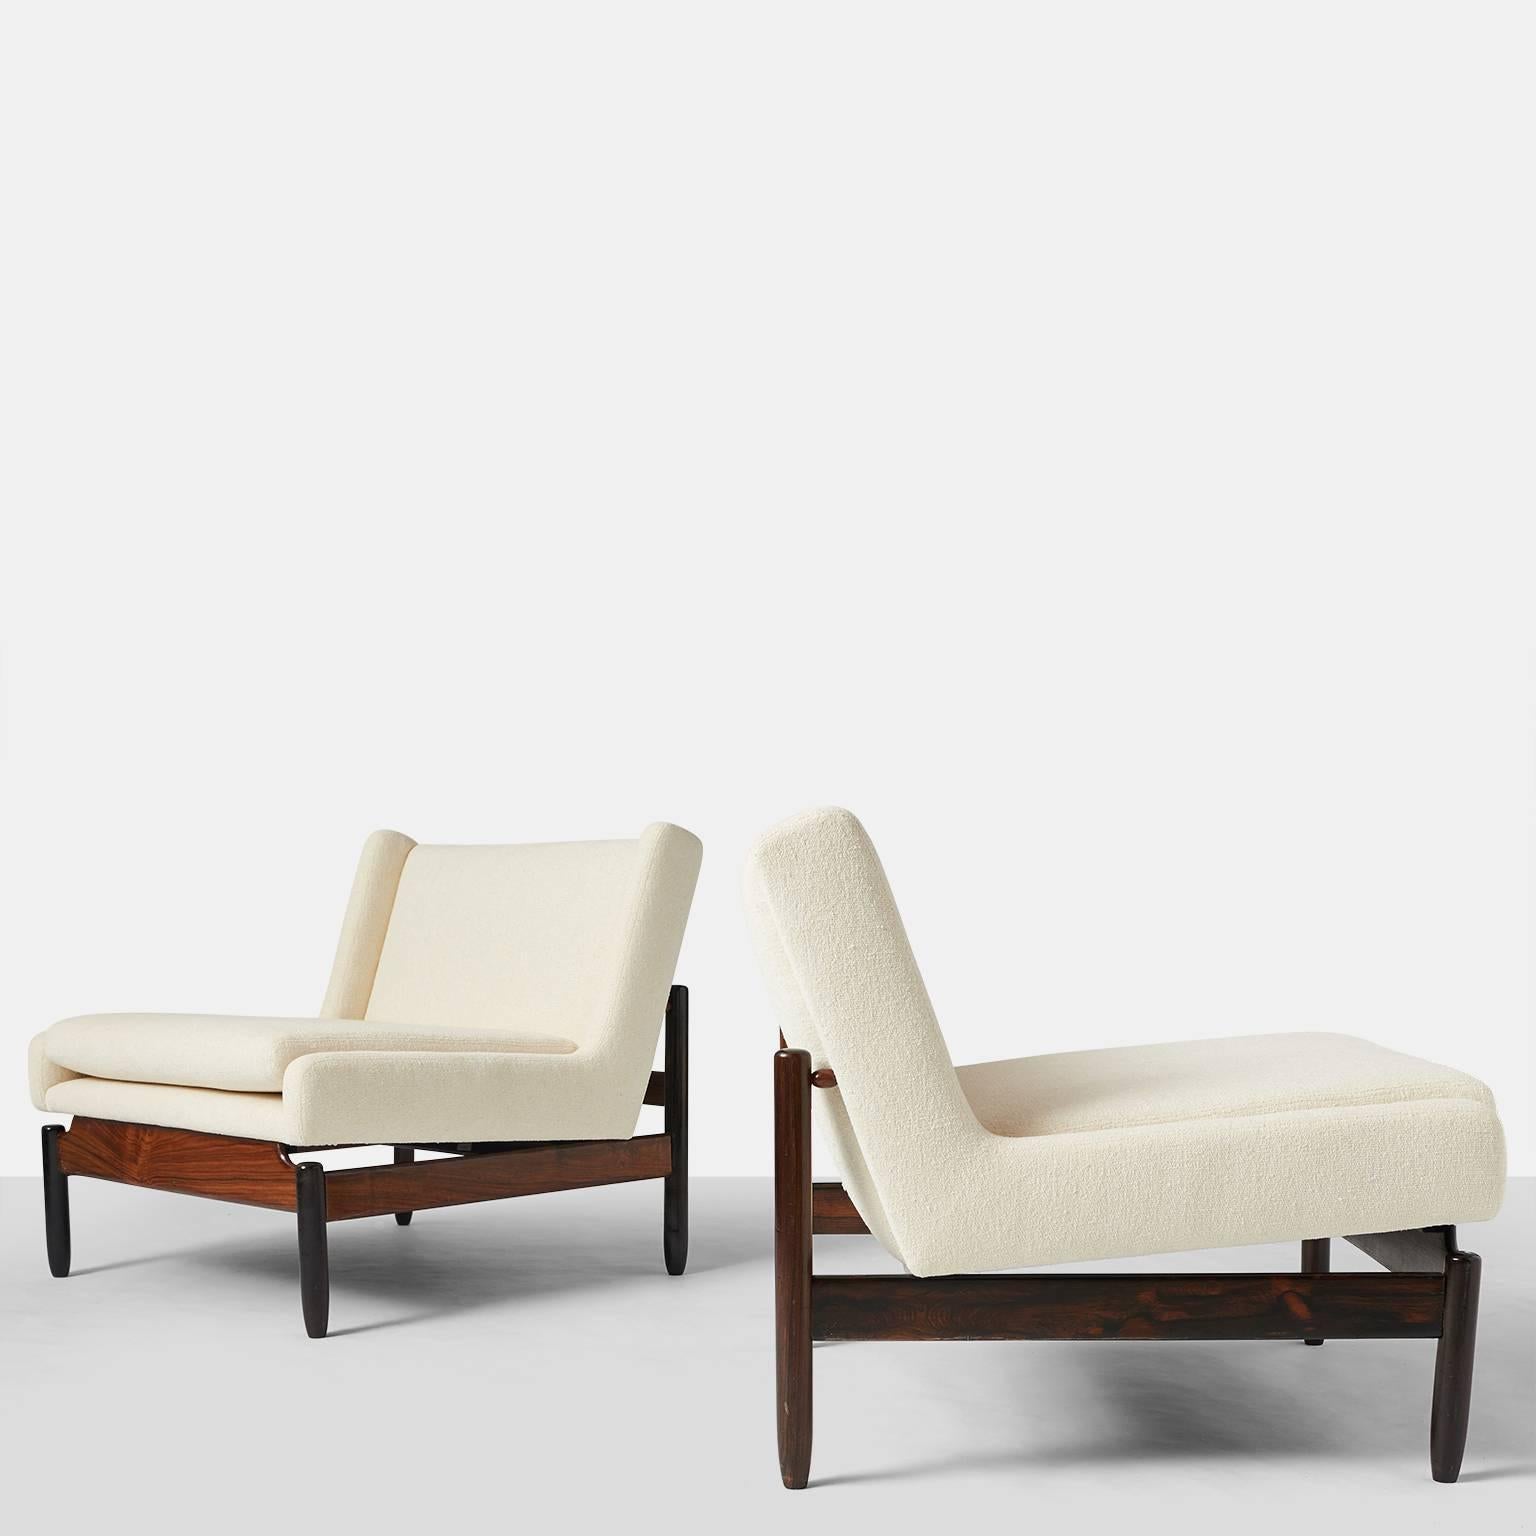 A pair of Vivi lounge chairs by Sergio Rodrigues in jacaranda wood and upholstered in a luxurious soft wool bouclé from Holland & Sherry.
Brazil, circa 1950s.